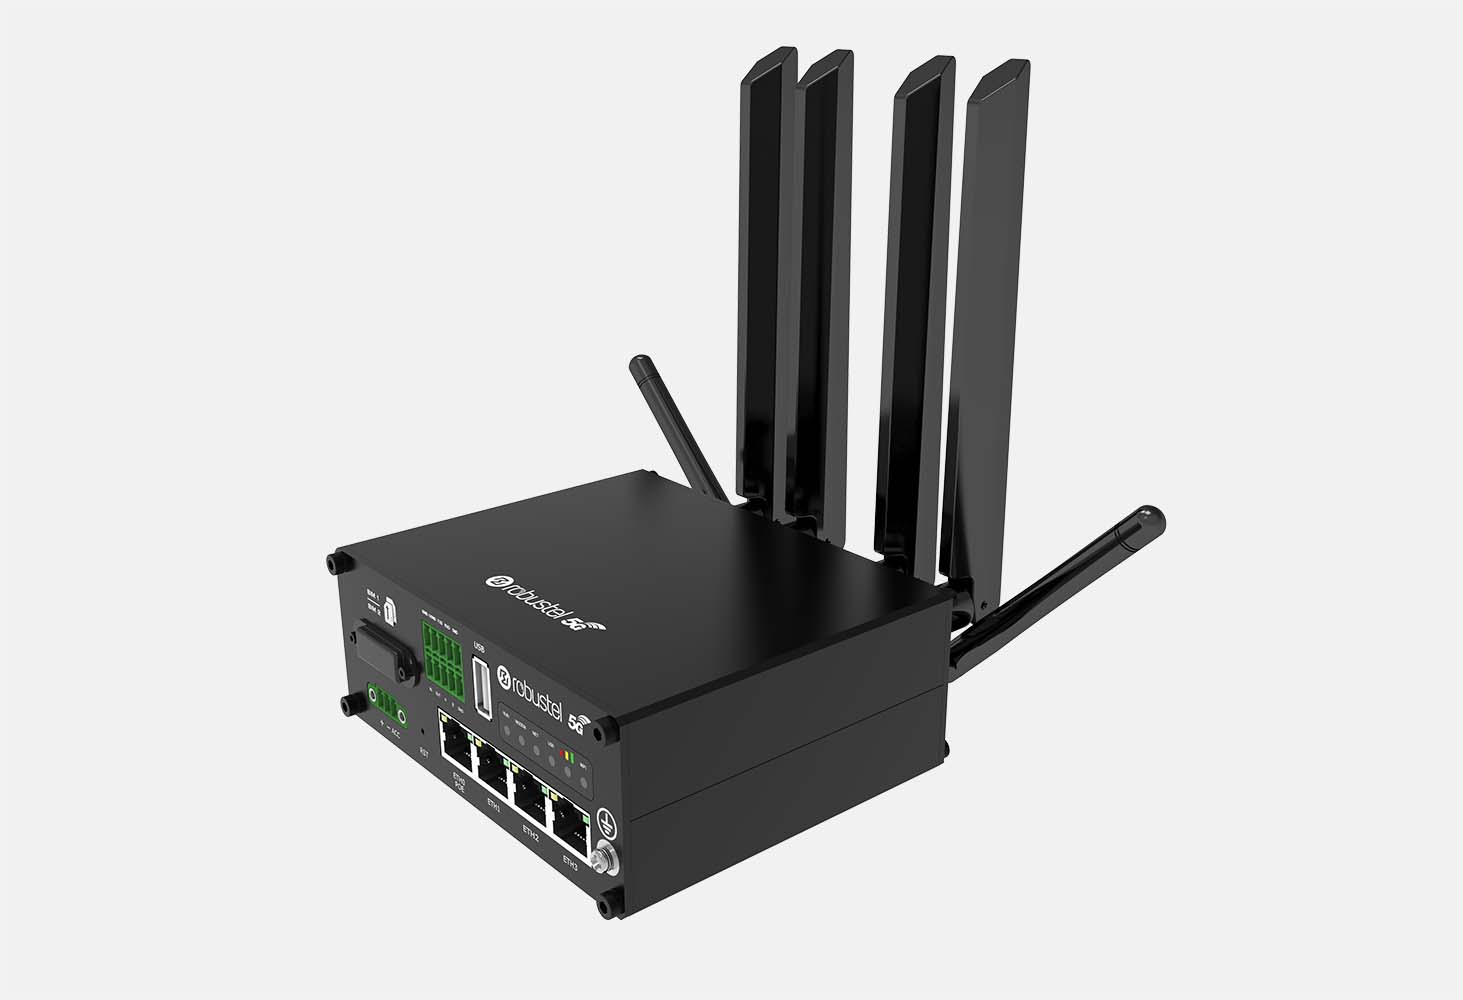 R5020 5G Wifi Wireless Router | Robustel